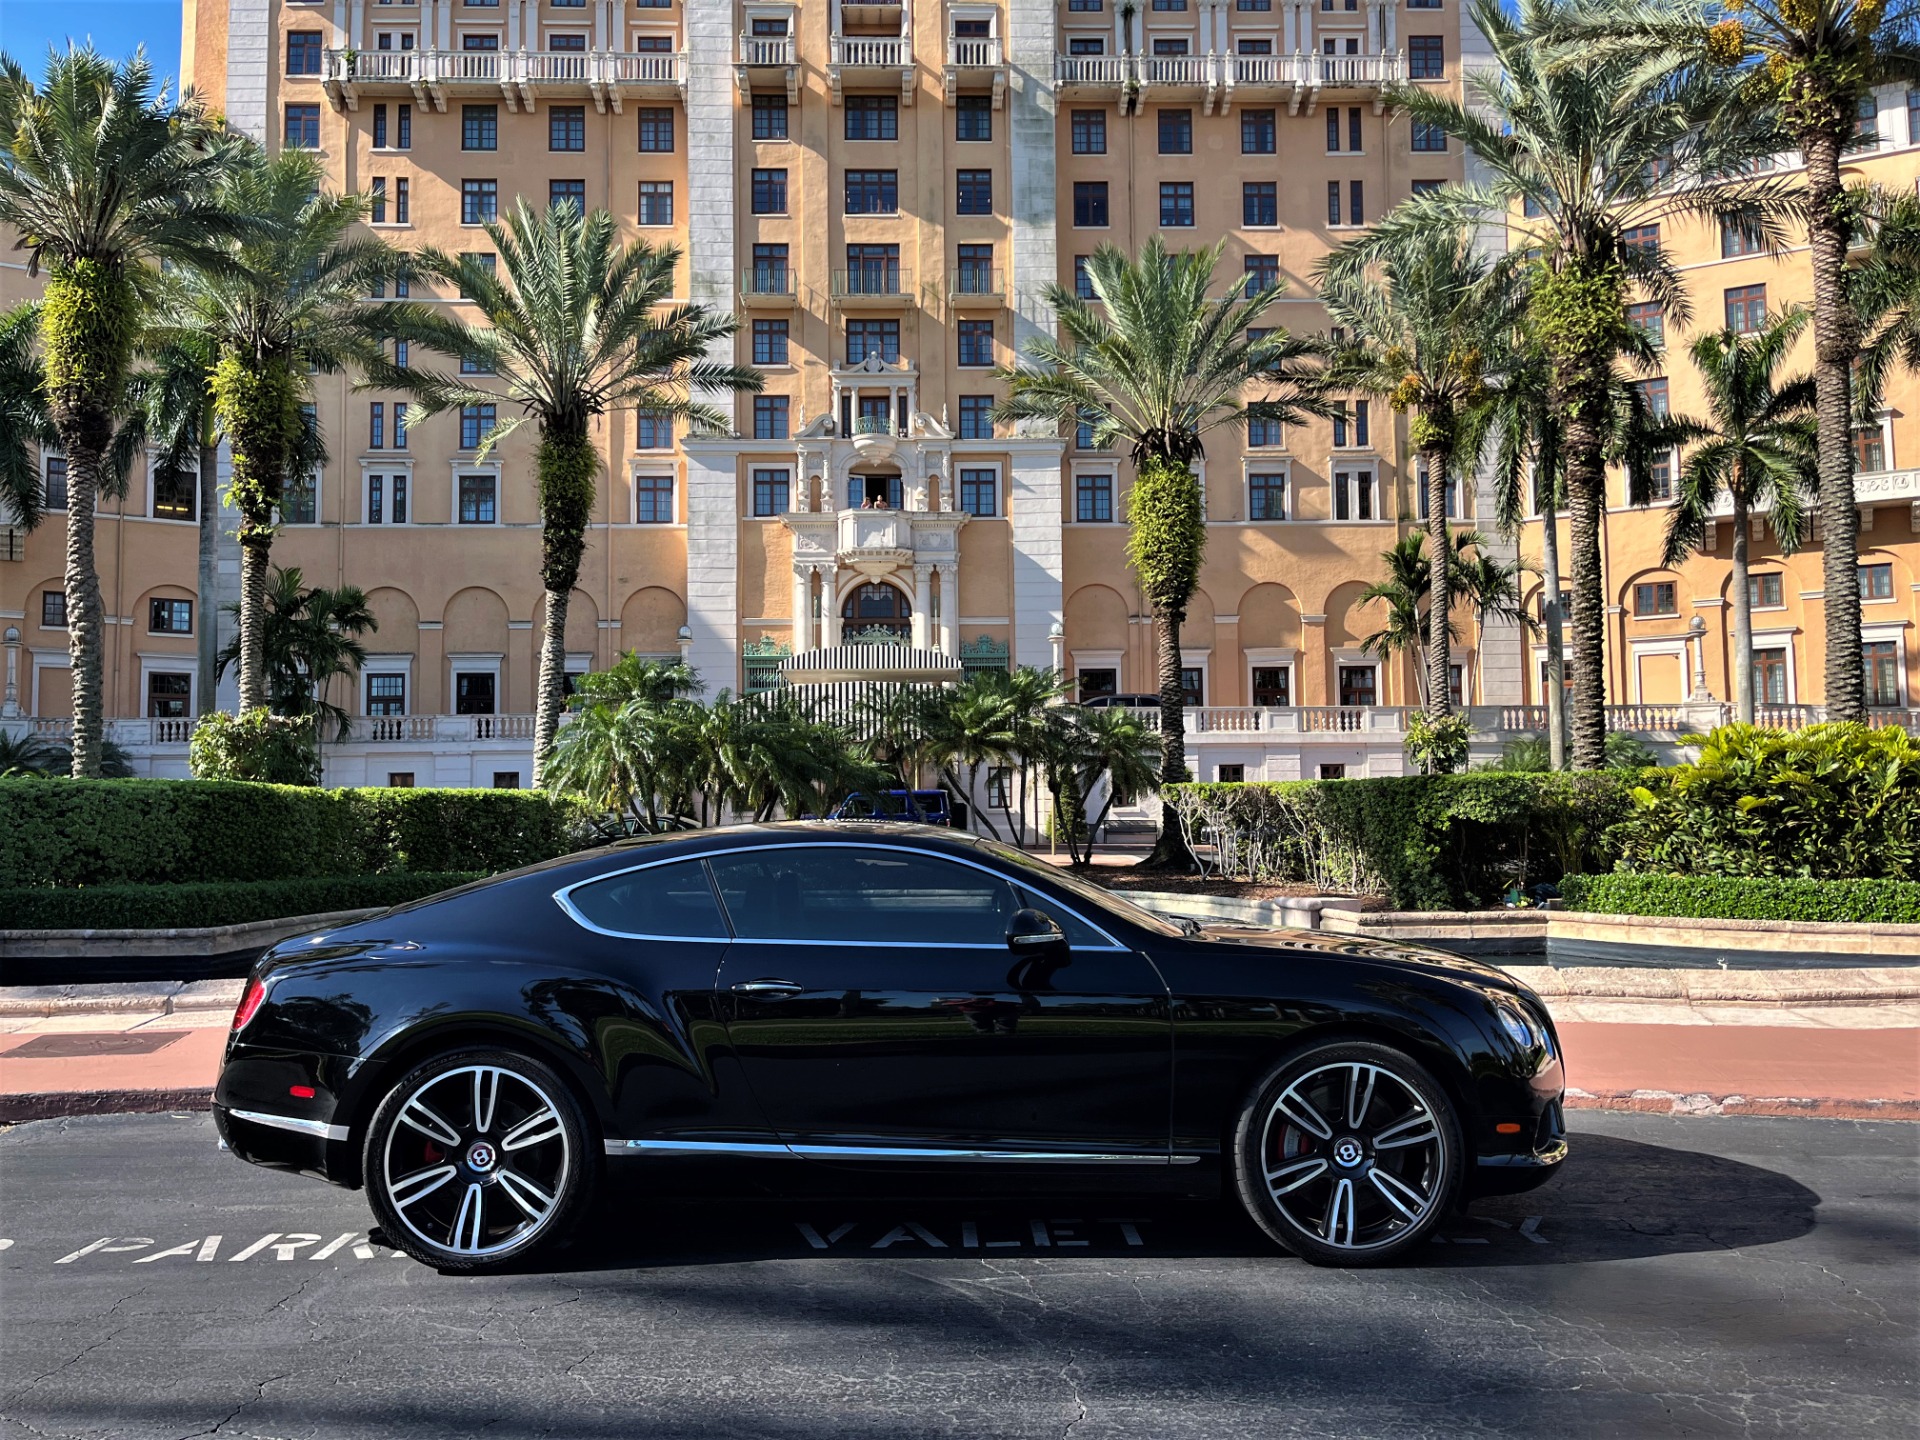 Used 2014 Bentley Continental GT V8 for sale $98,850 at The Gables Sports Cars in Miami FL 33146 1